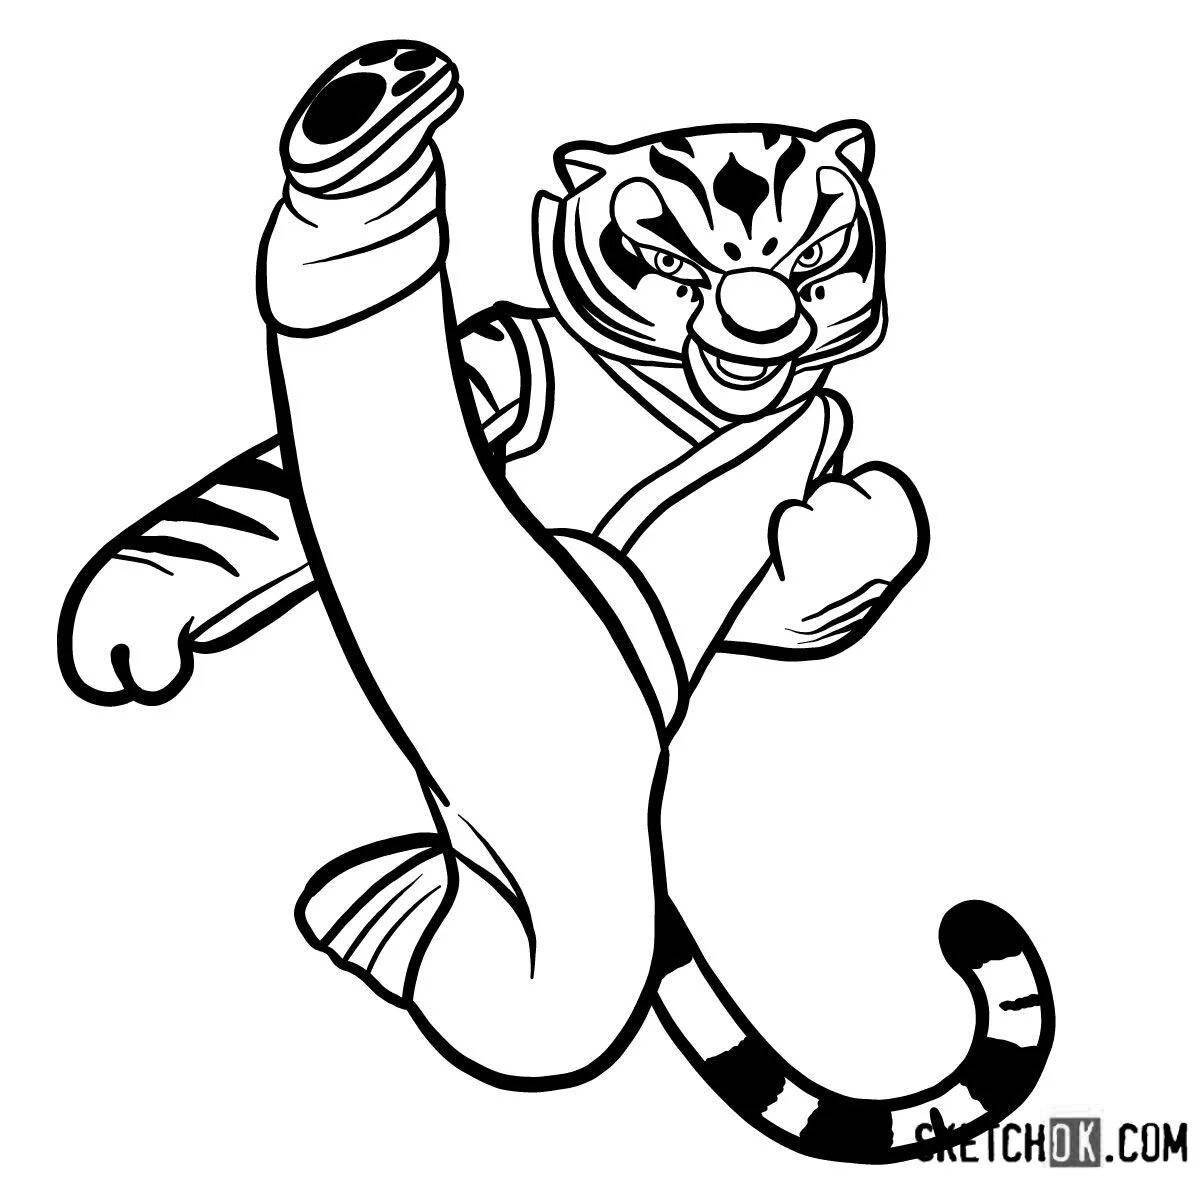 Tigress animated coloring page